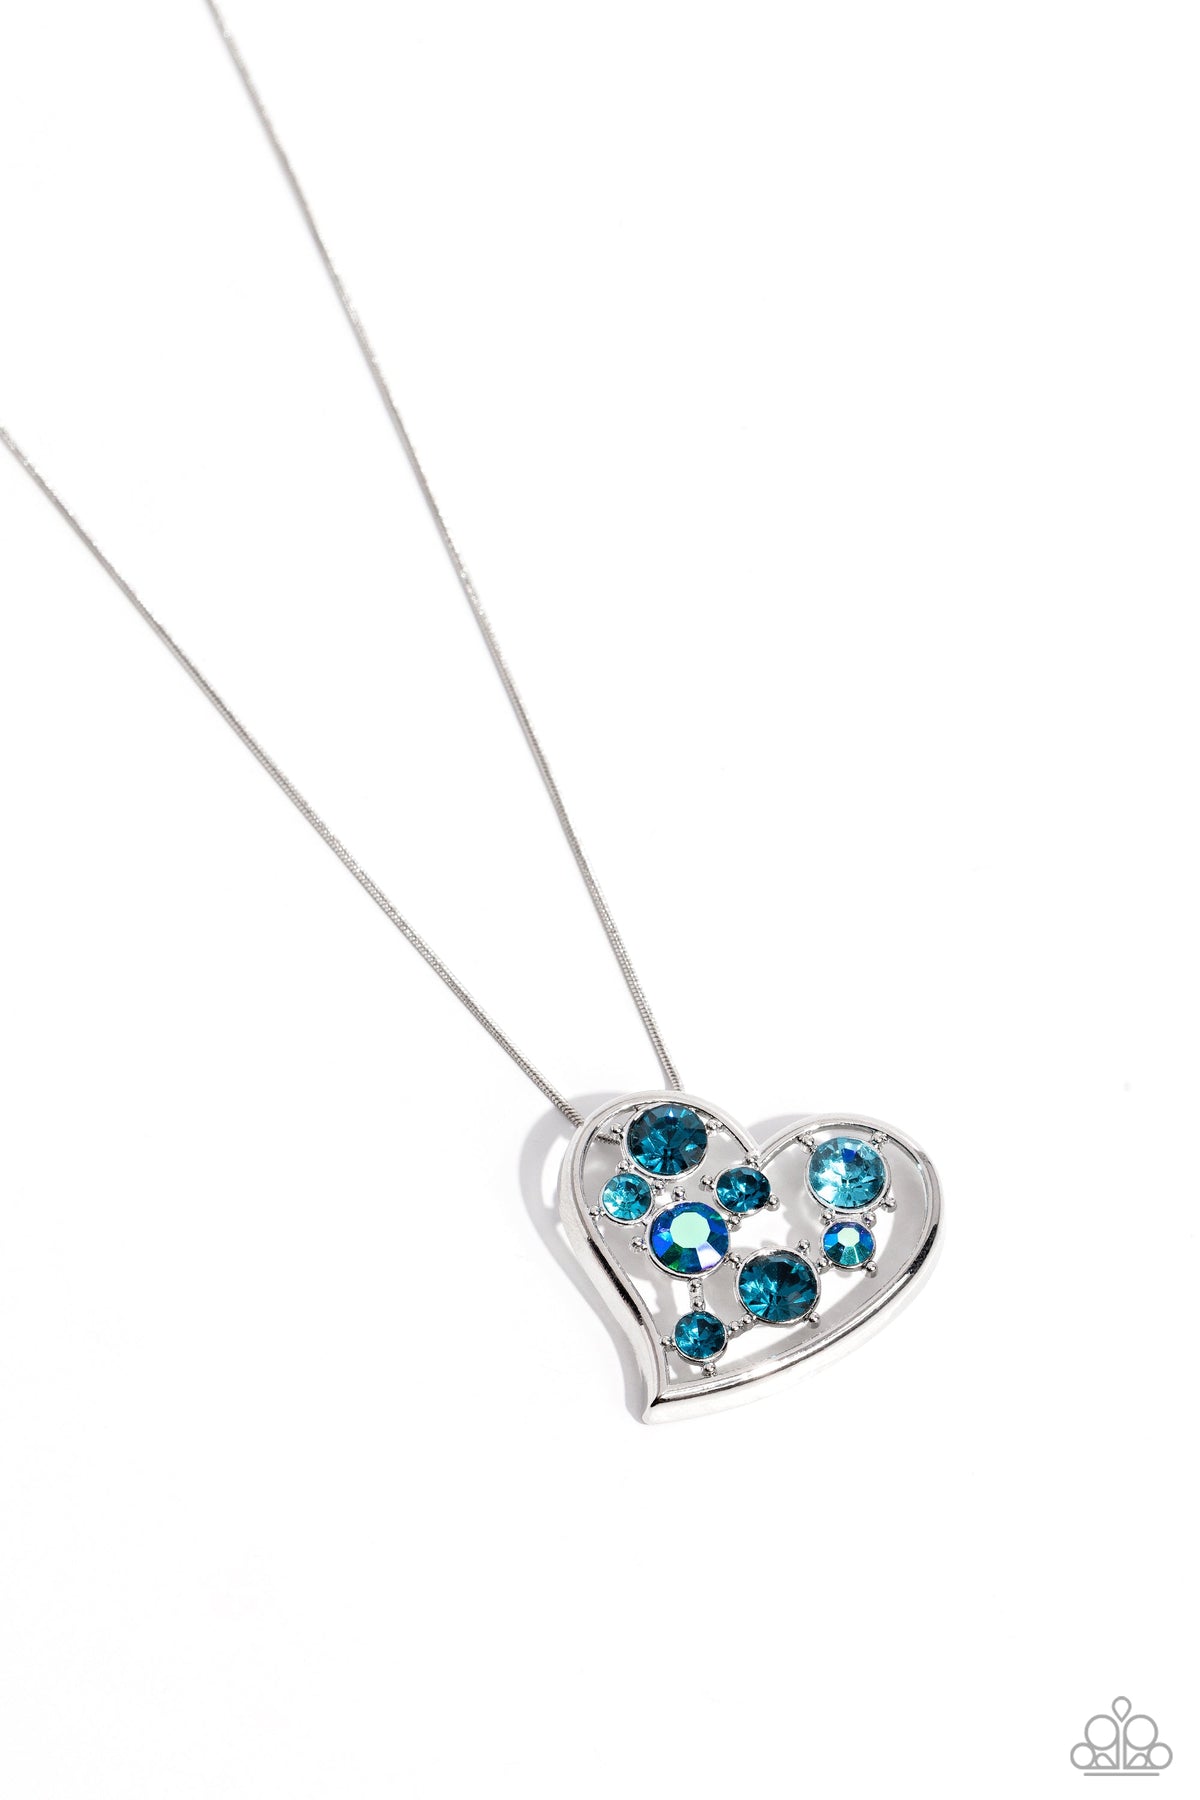 Romantic Recognition Blue Rhinestone Heart Necklace - Paparazzi Accessories- lightbox - CarasShop.com - $5 Jewelry by Cara Jewels